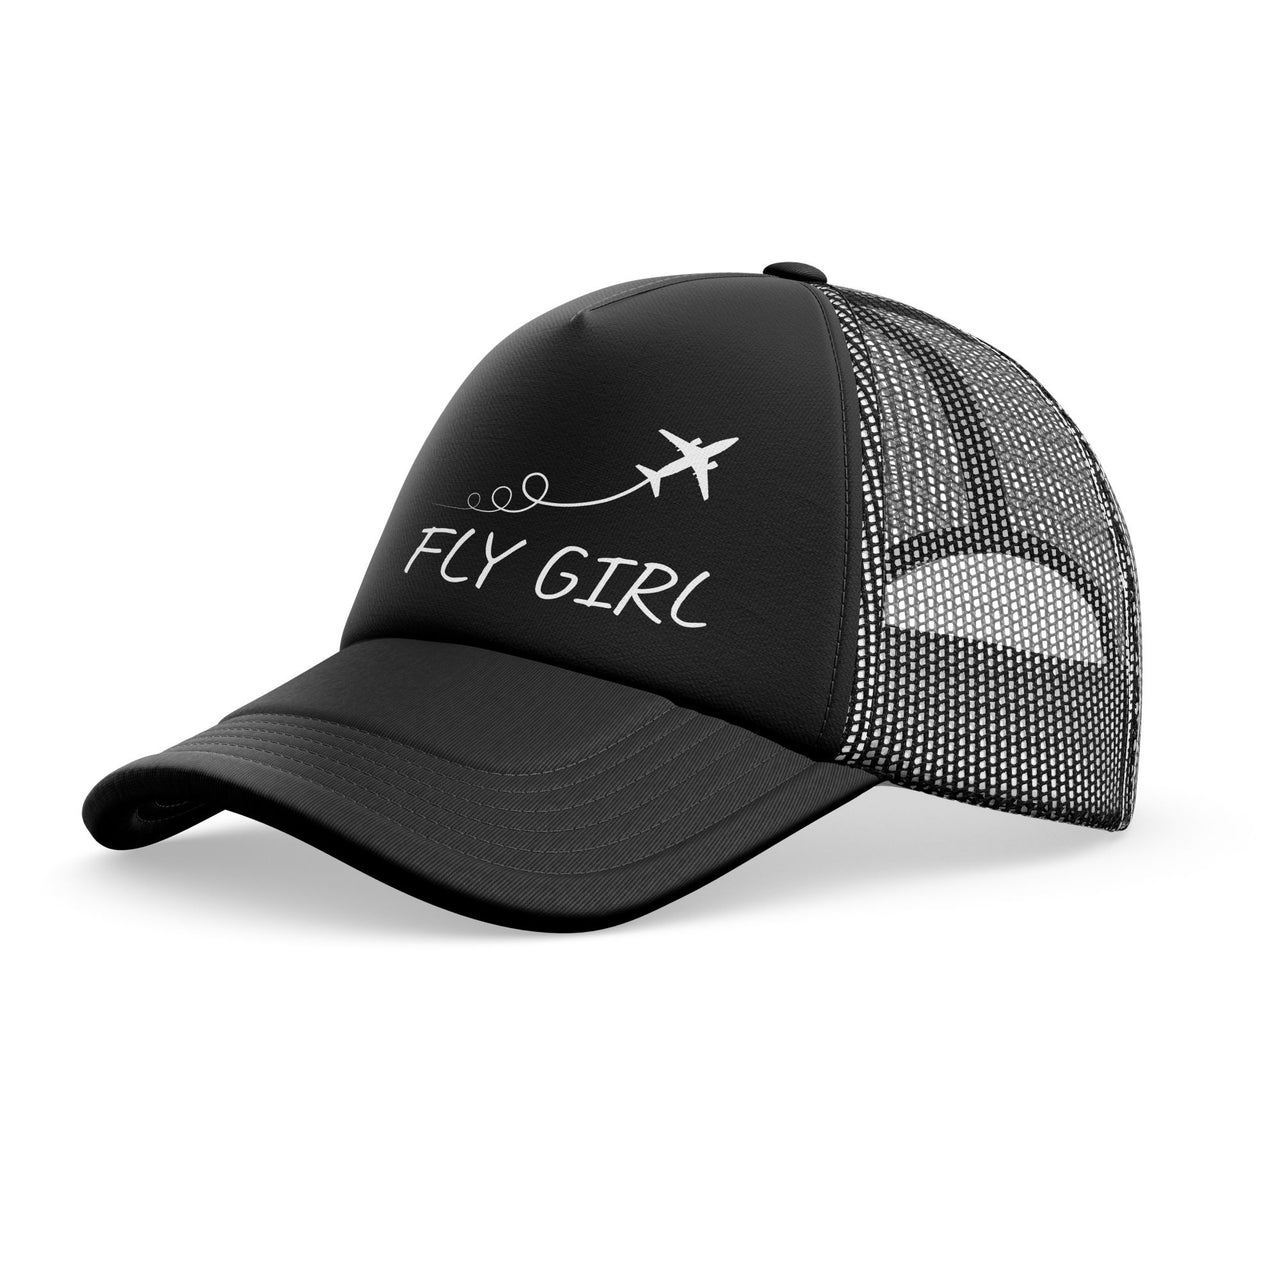 Just Fly It & Fly Girl Designed Trucker Caps & Hats